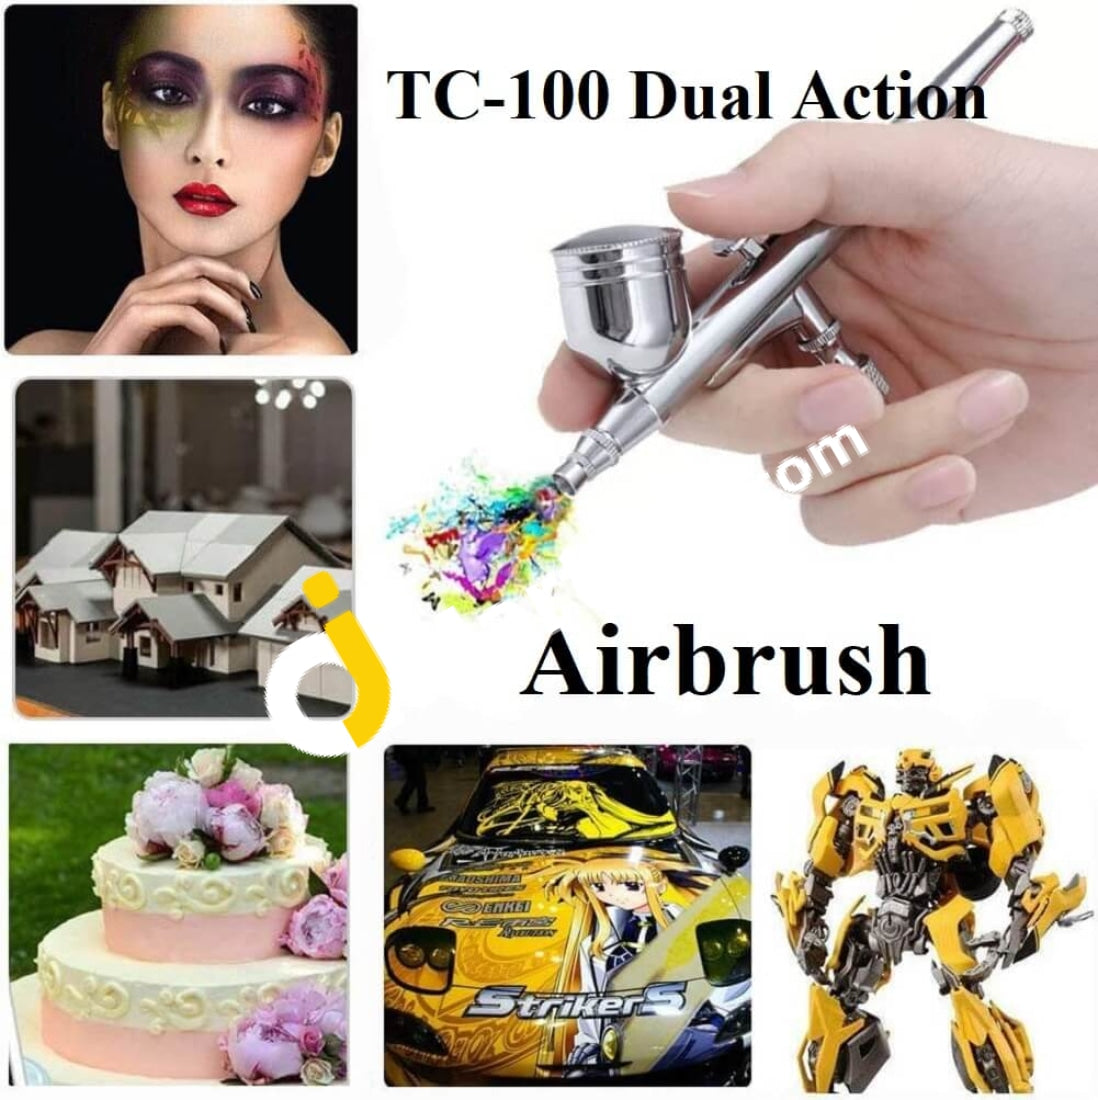 Dual-Action Airbrush & Compressor Kit For Art Painting Tattoo Manicure Craft Cake Spray Model Air